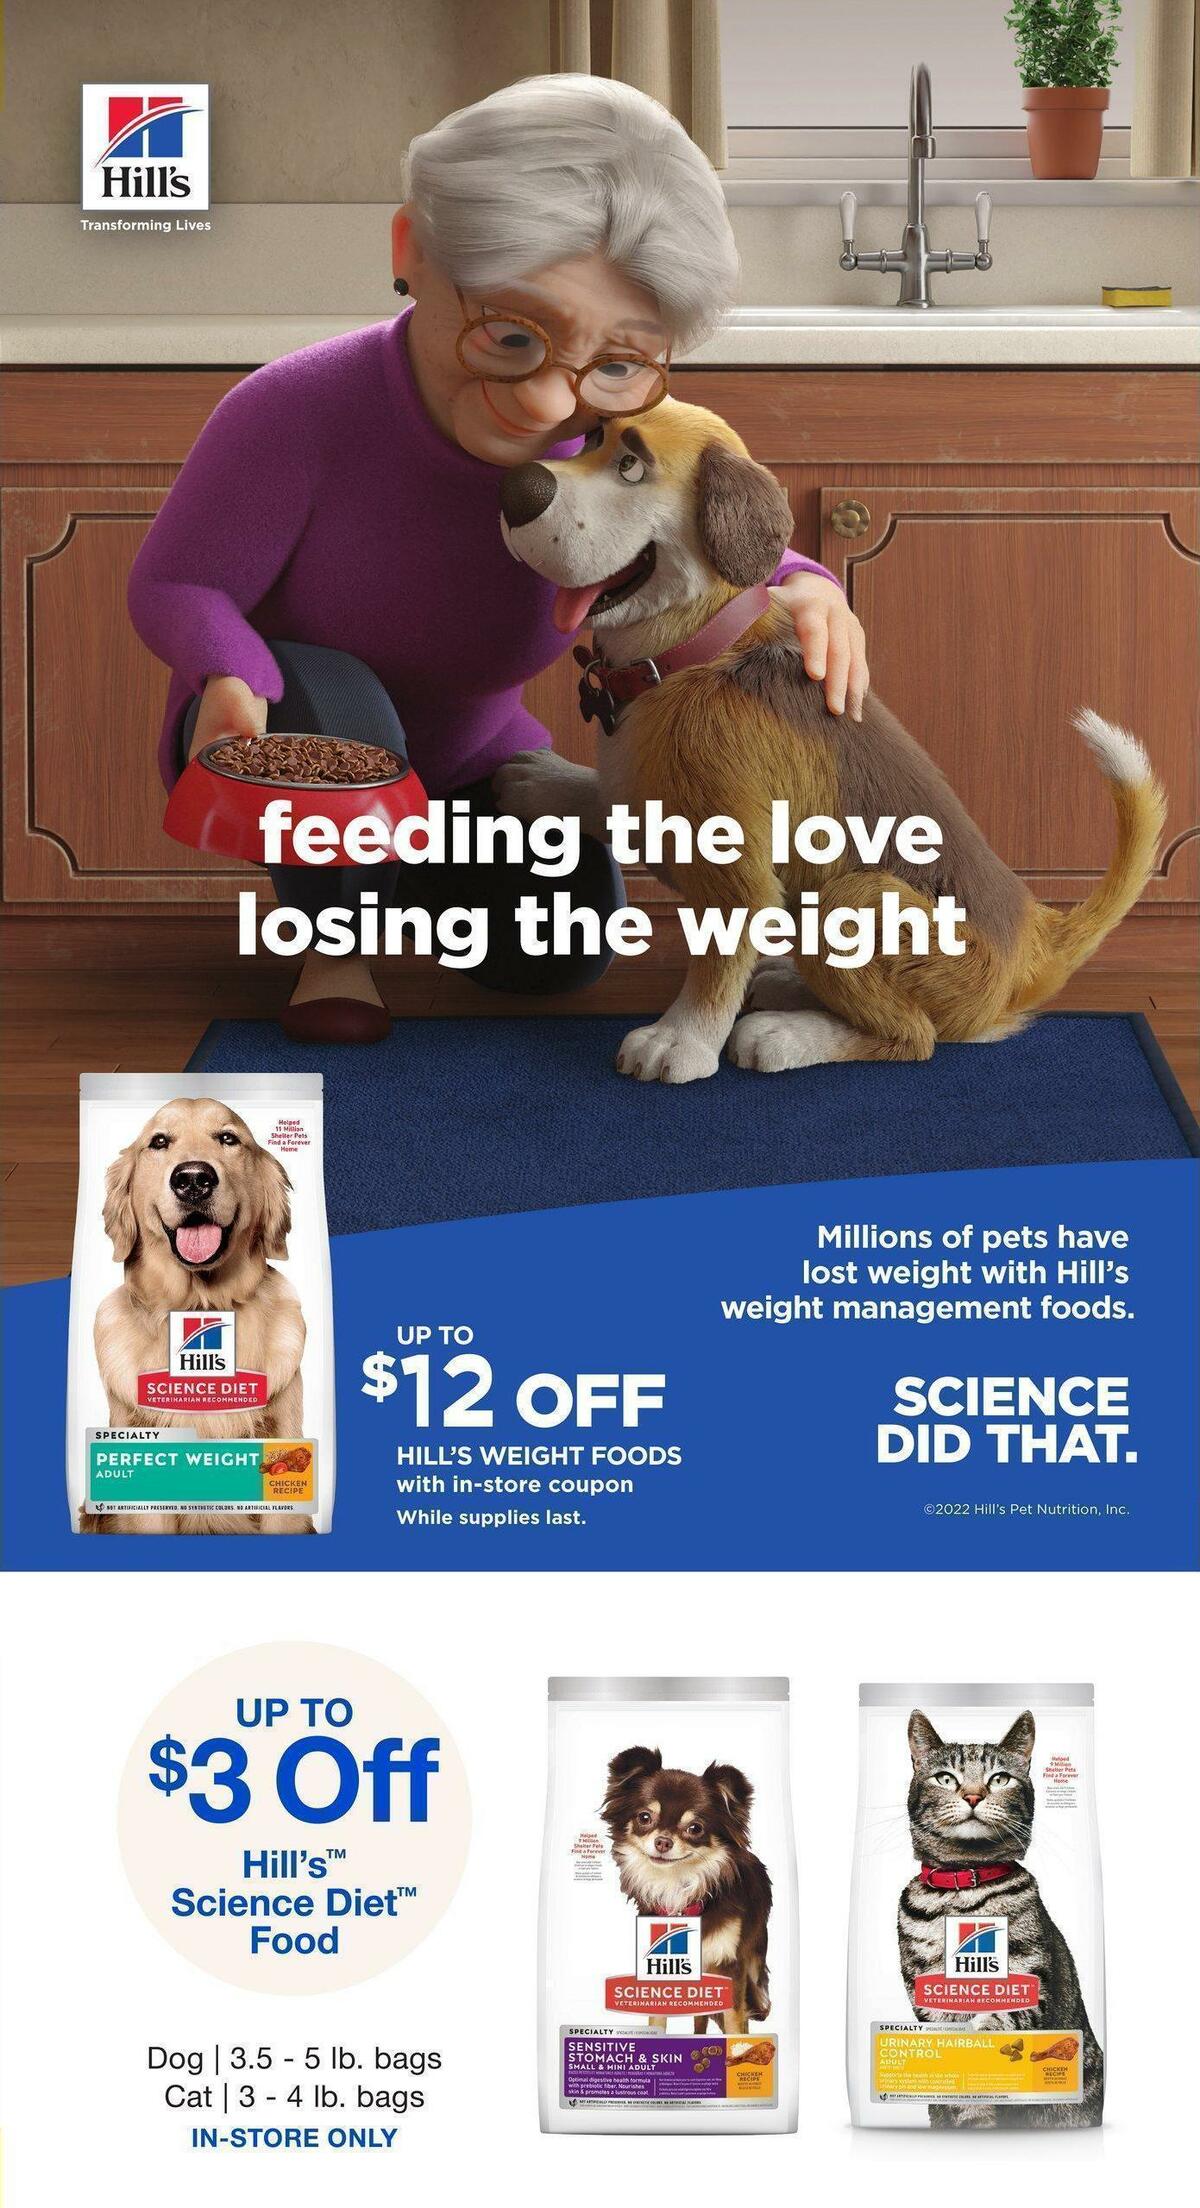 Pet Supermarket Weekly Ad from January 2